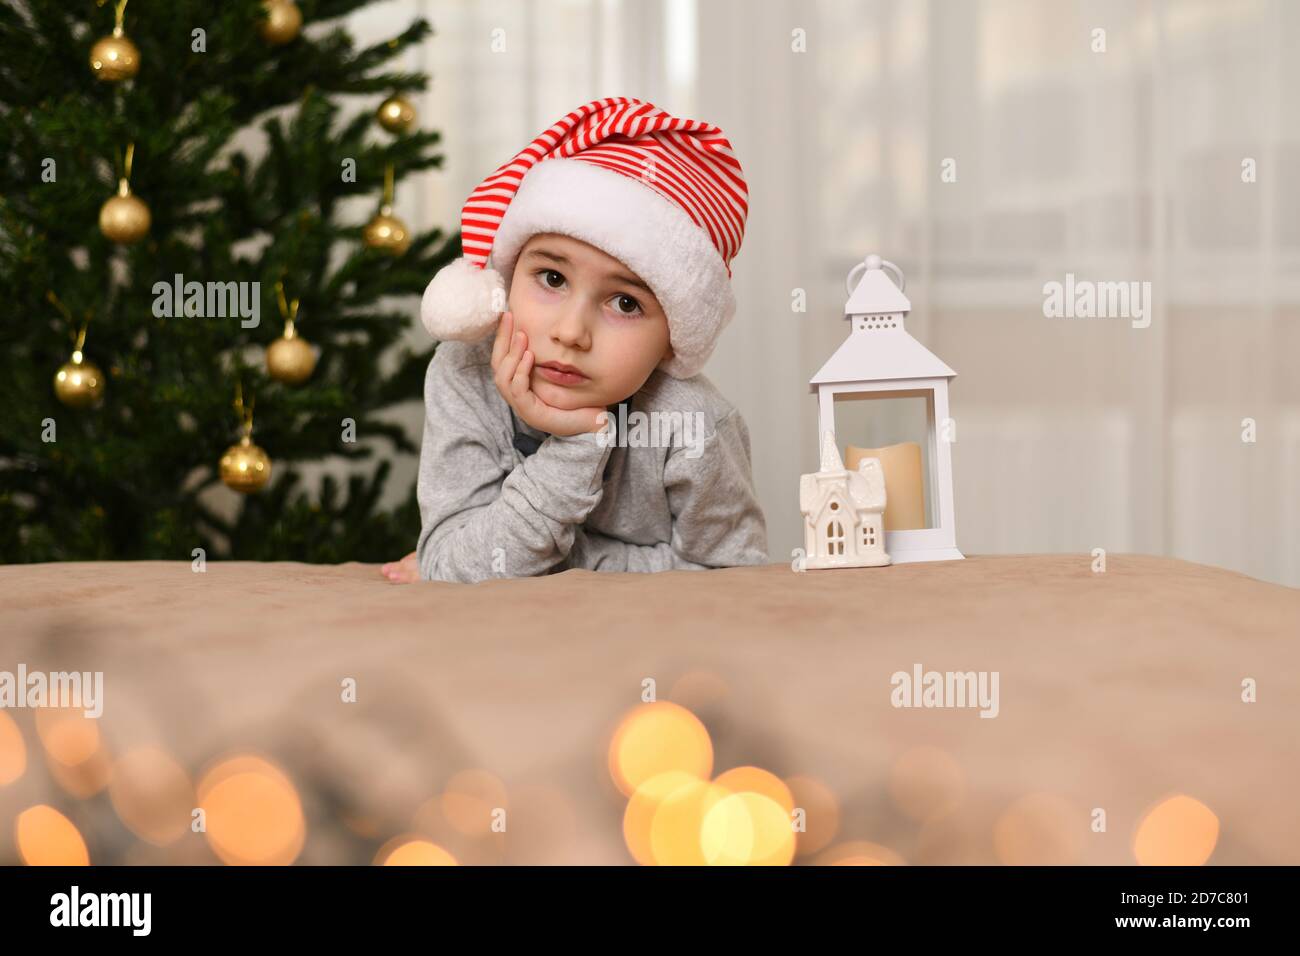 A boy with sad eyes, sitting with his hand holding his hand cheek. Dressed in cap. I leaned near the Christmas tree. Stock Photo